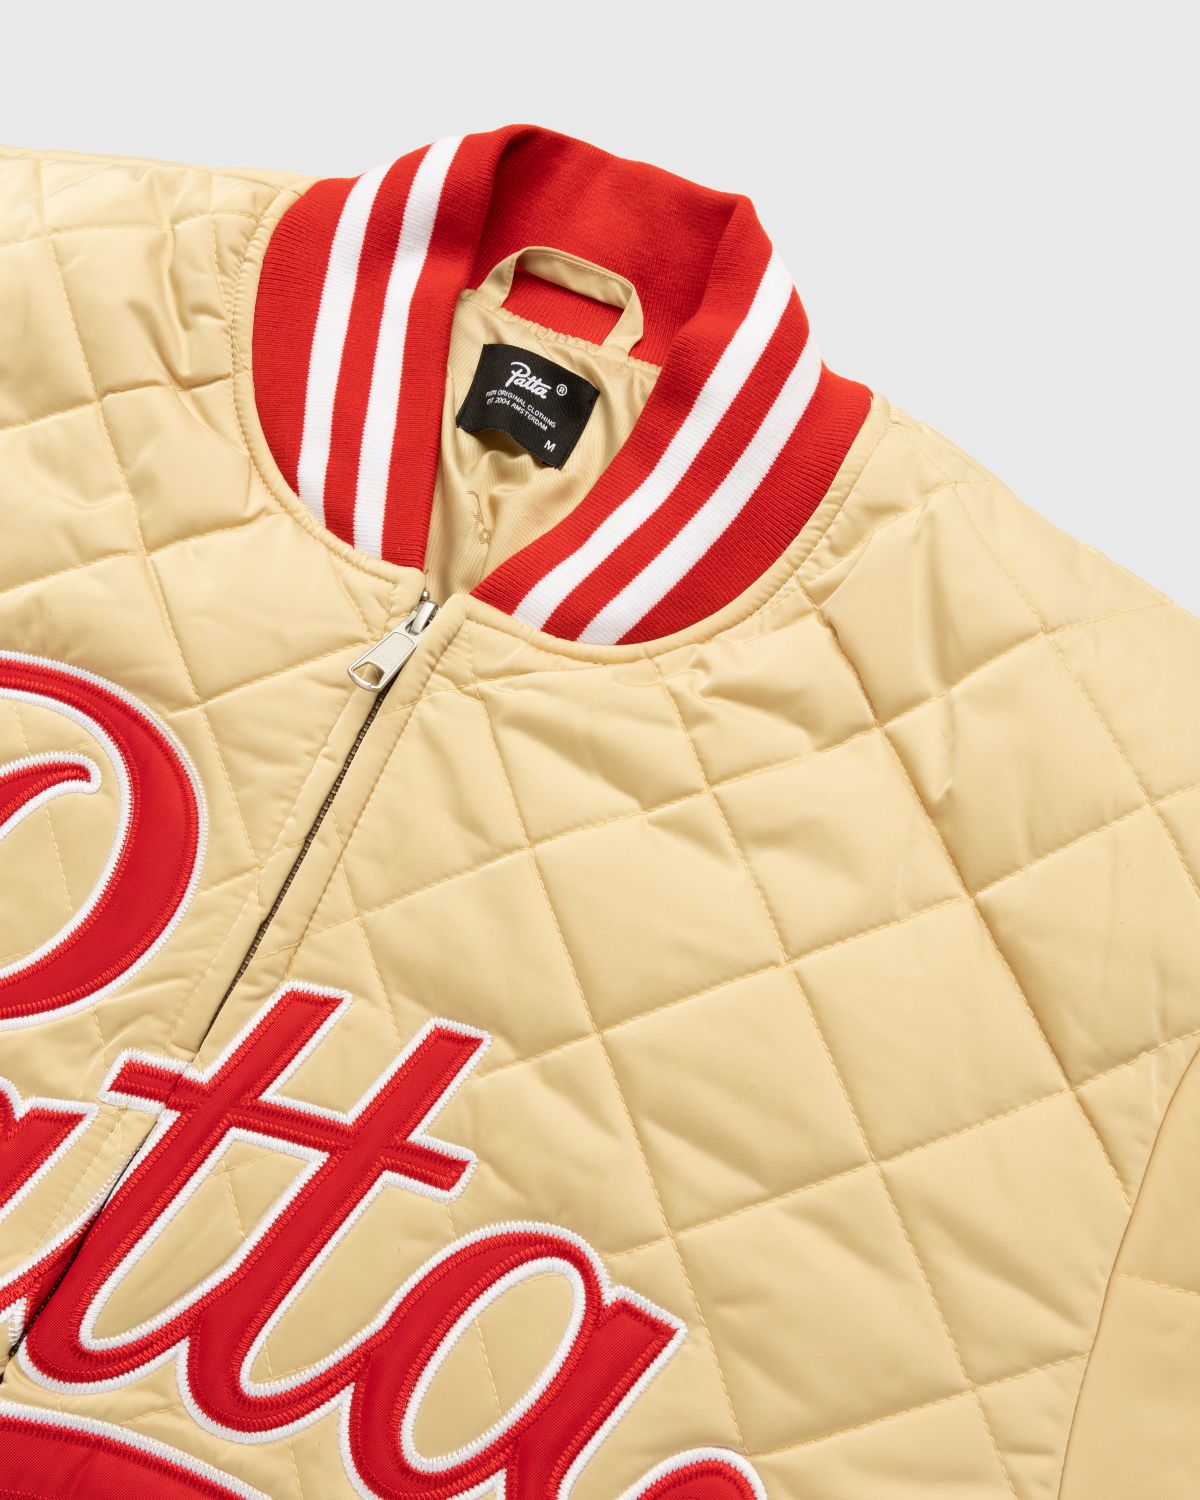 Patta – Diamond Quilted Sports Jacket Mojave Desert - Bomber Jackets - Brown - Image 4